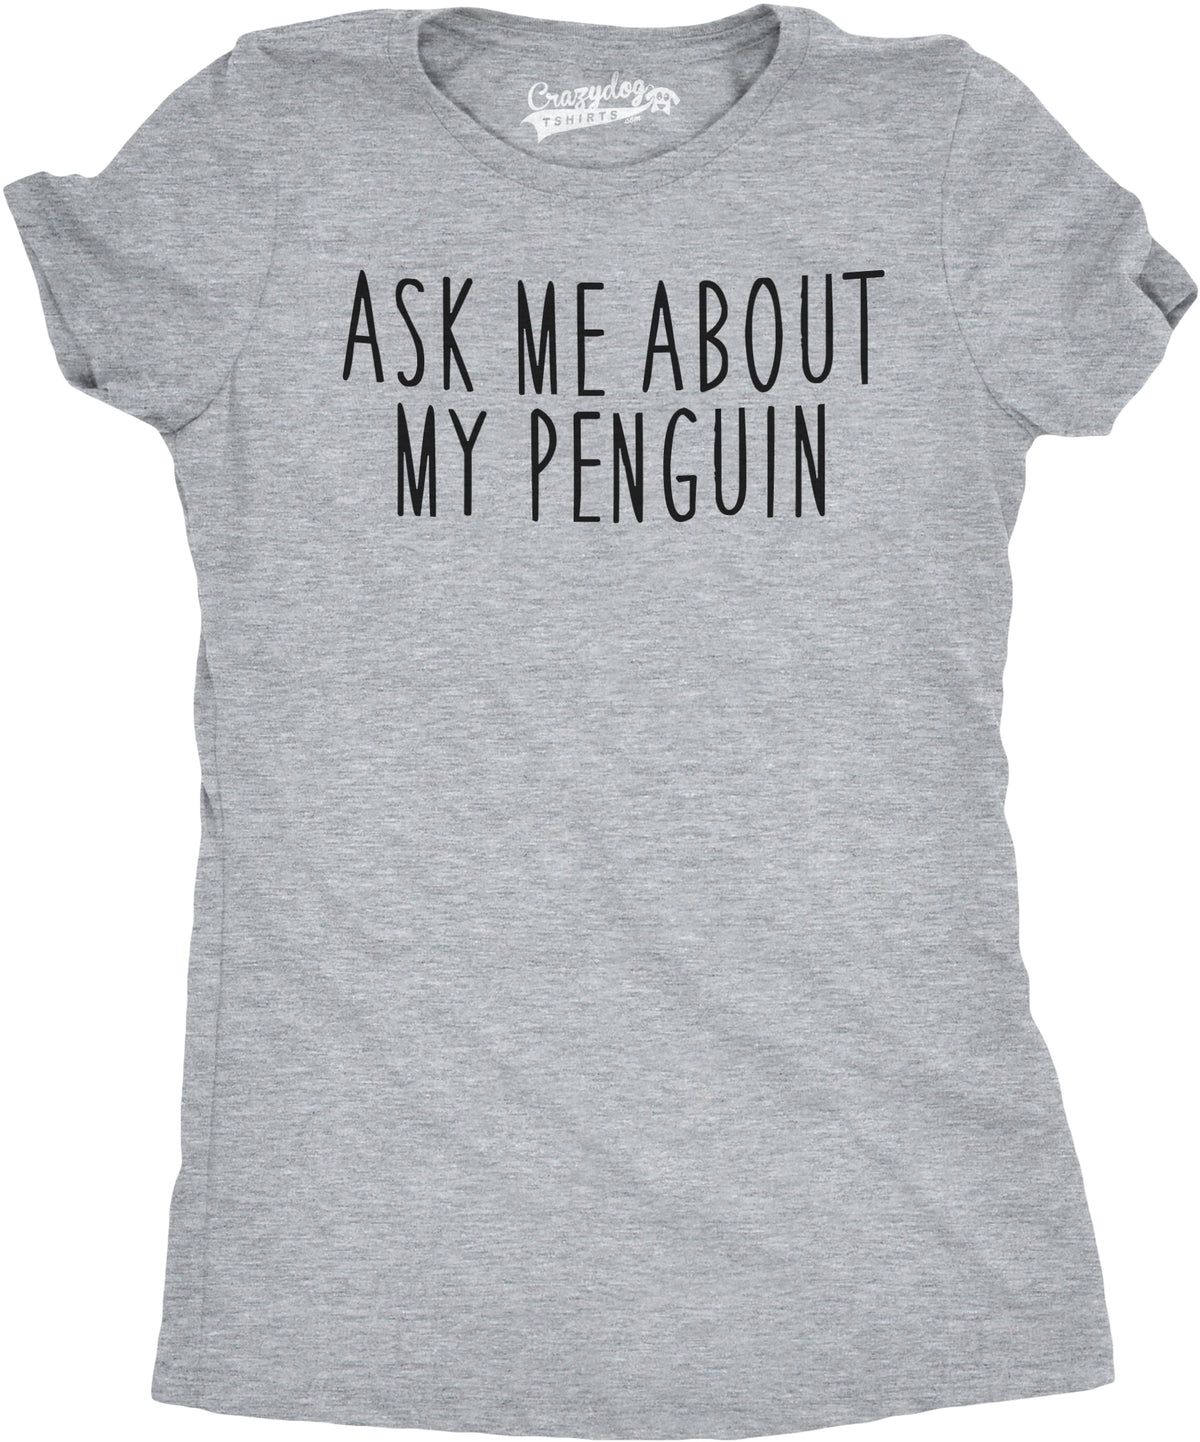 Funny Light Heather Grey Ask Me About My Penguin Flip Womens T Shirt Nerdy Animal Flip Tee